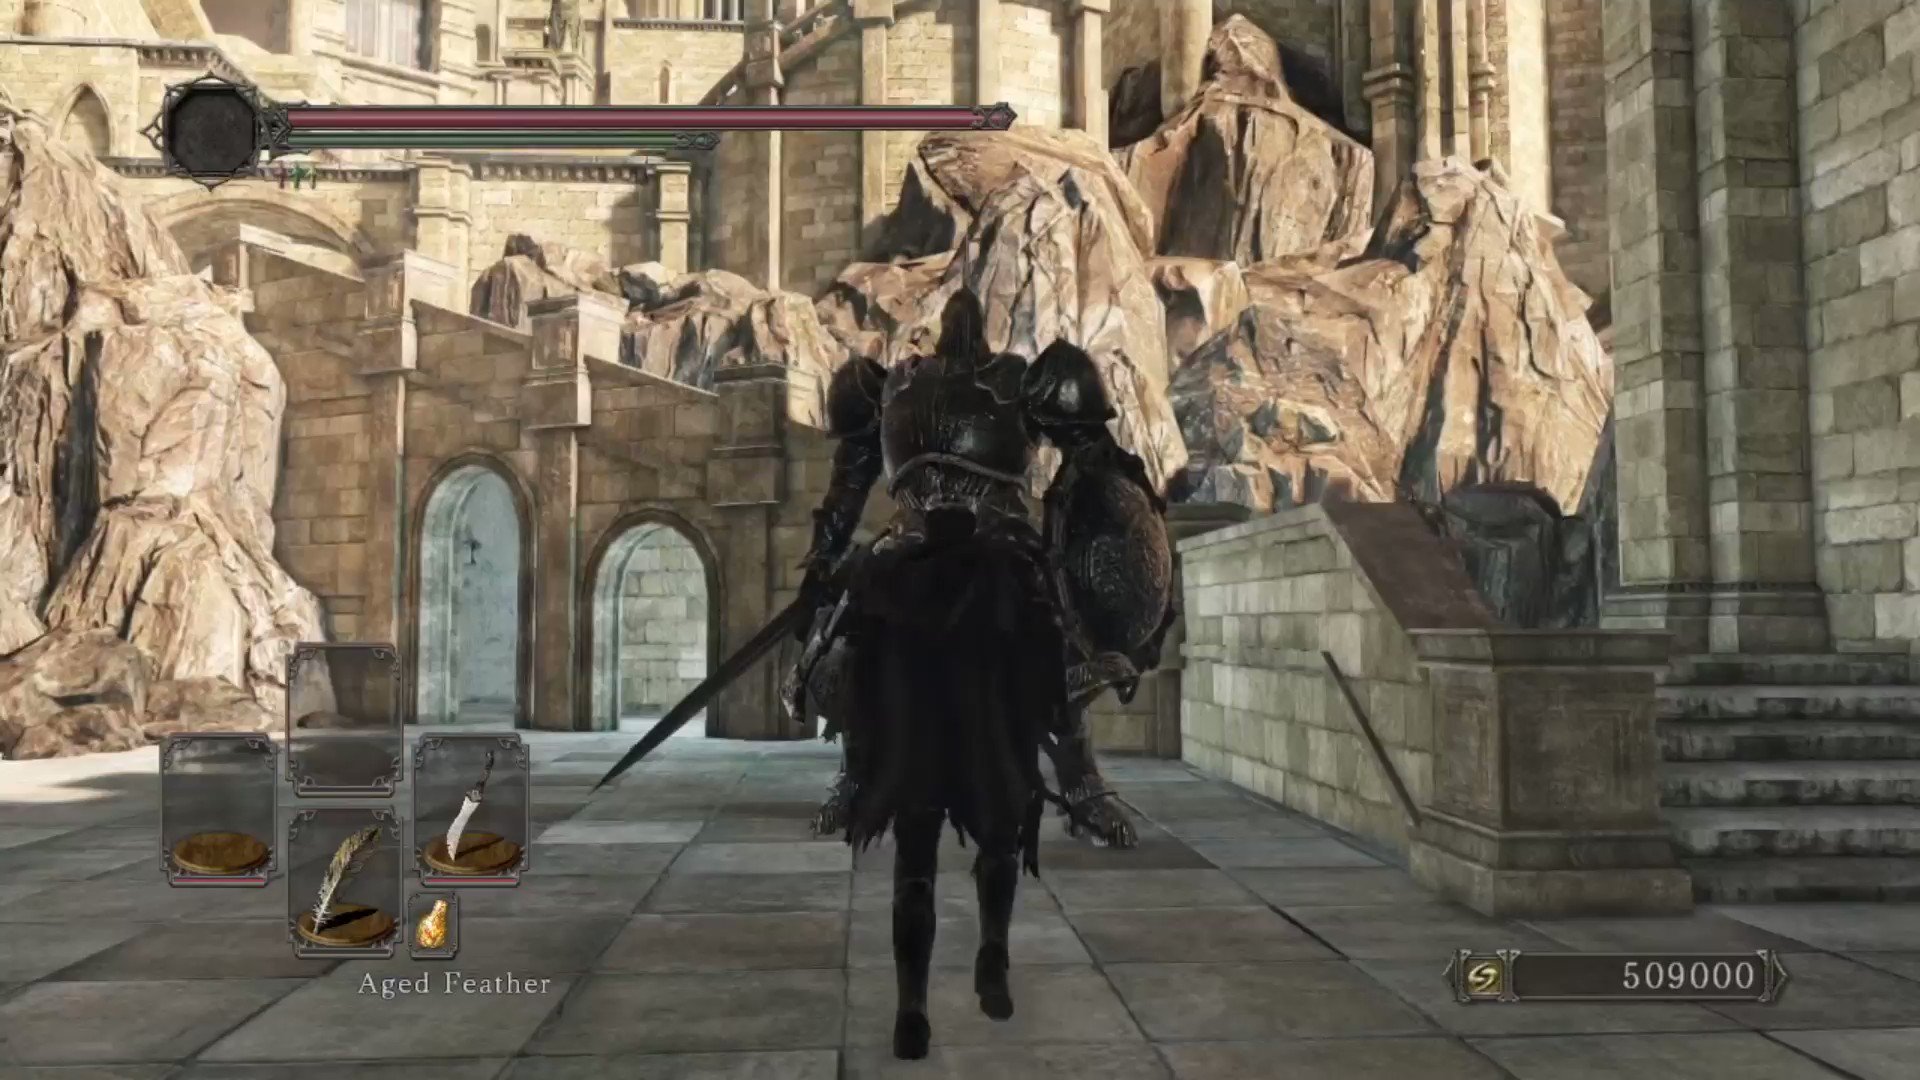 Twitter: "Dark Souls 2's bleed is a laughably bad status effect. For PvE, bleed only does a burst of 200 I made bleed also reduce physical defense for a